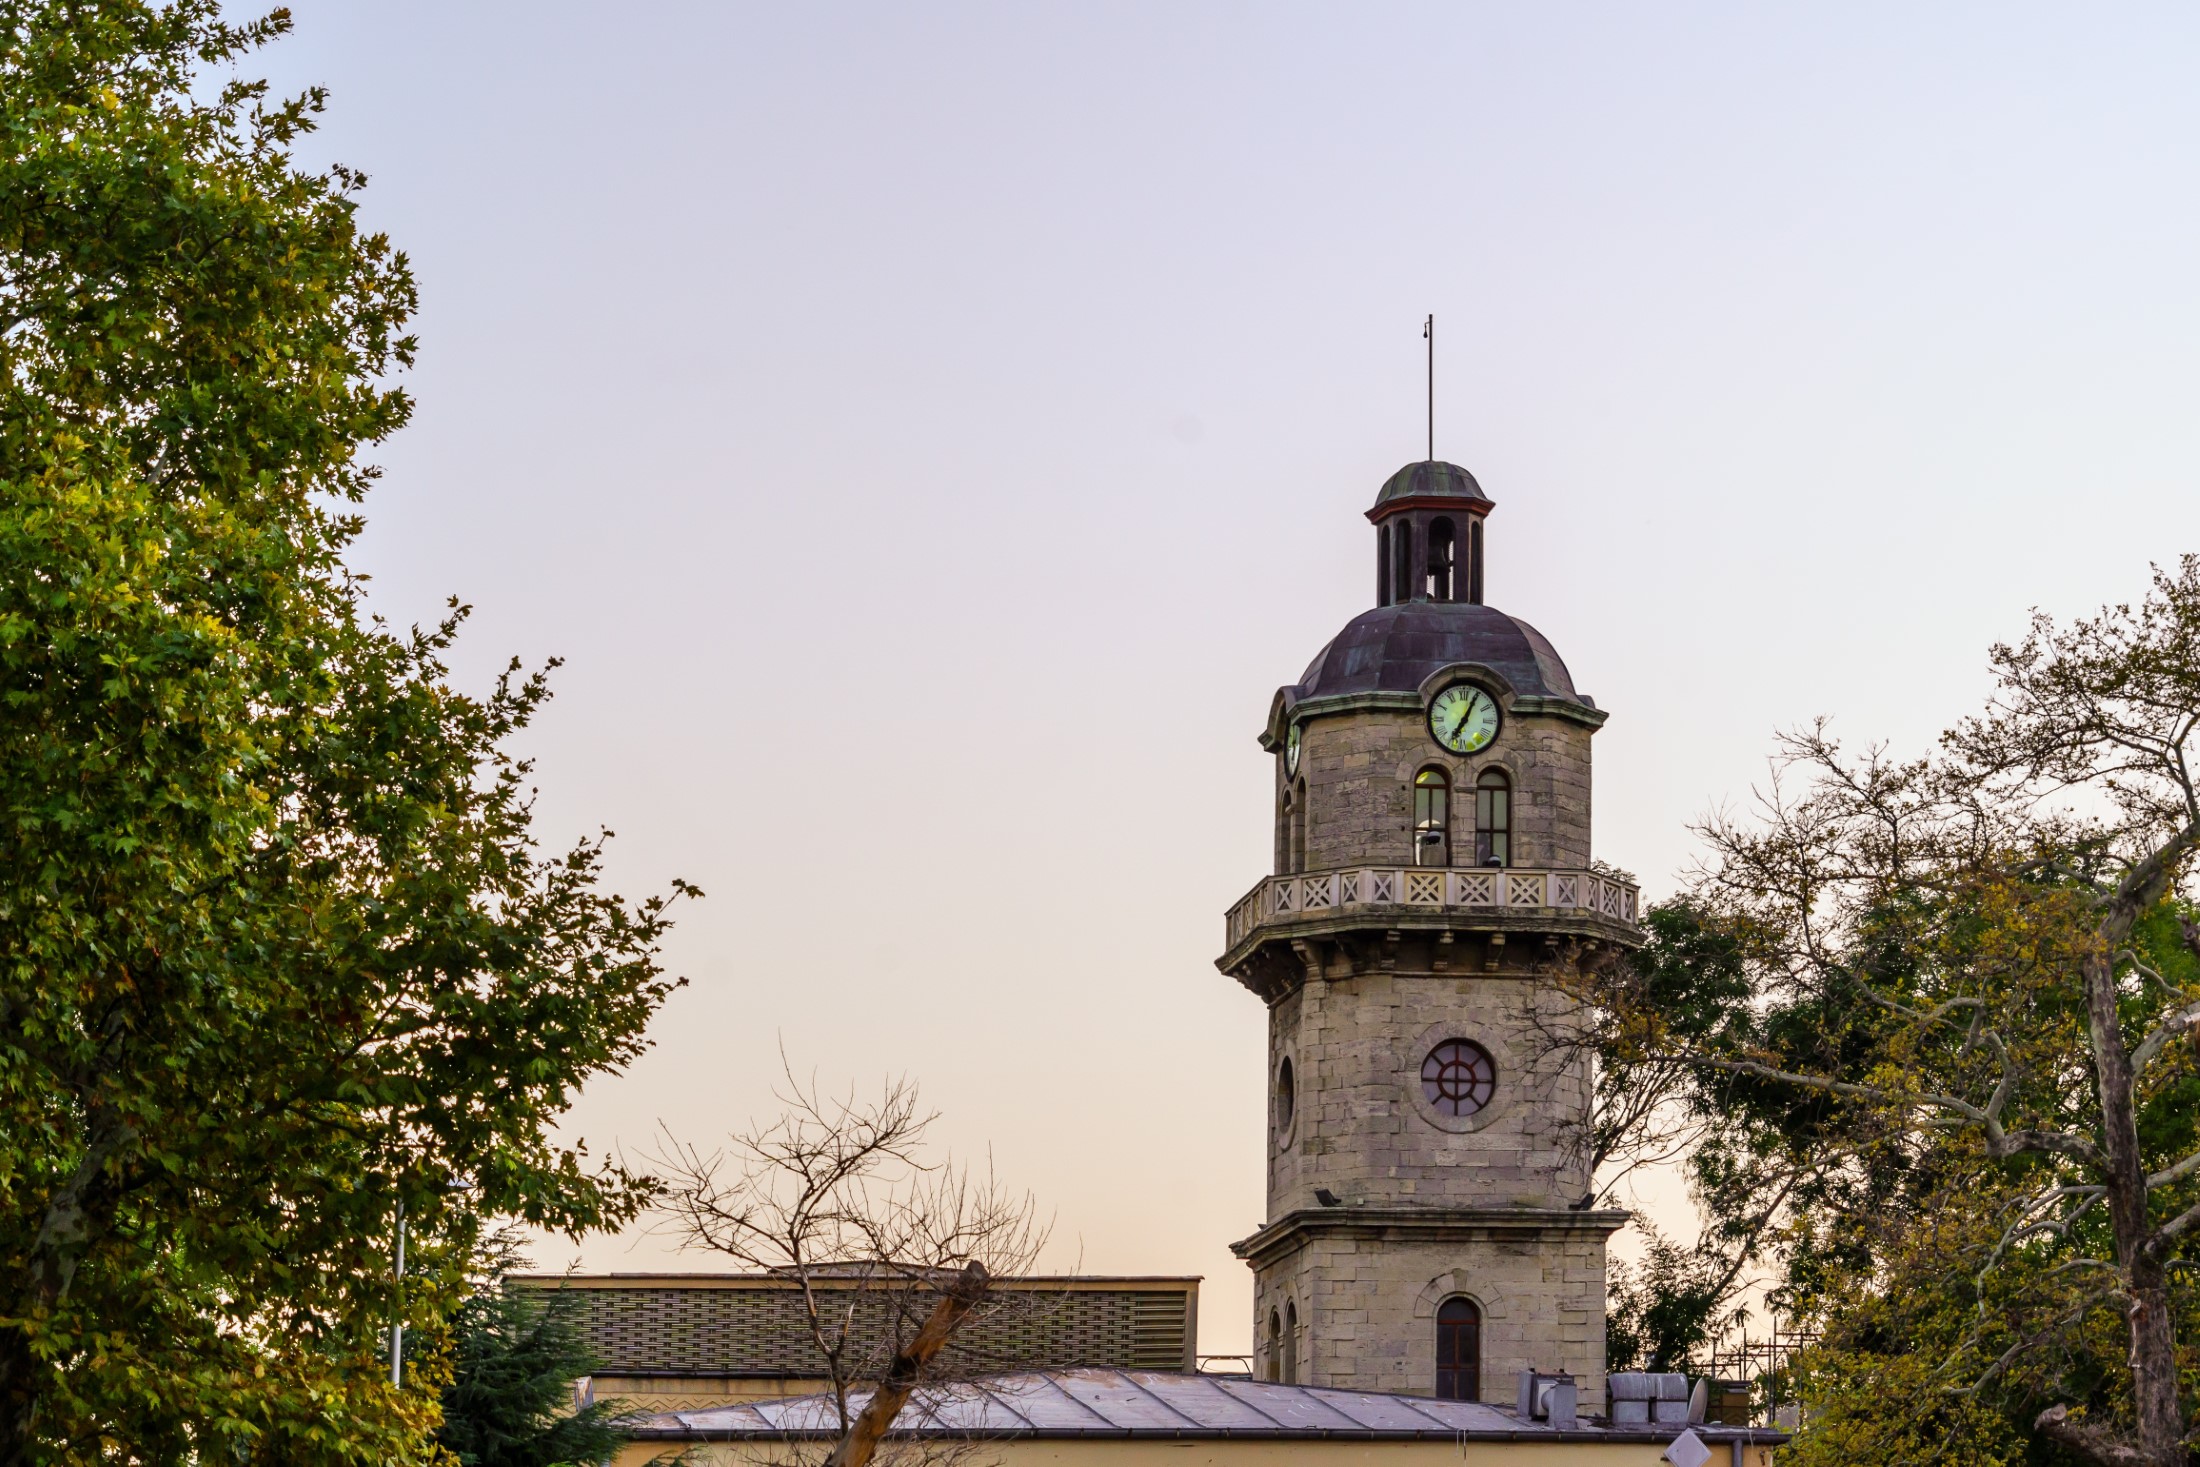 View of the historic Clock Tower, in Varna, Bulgaria